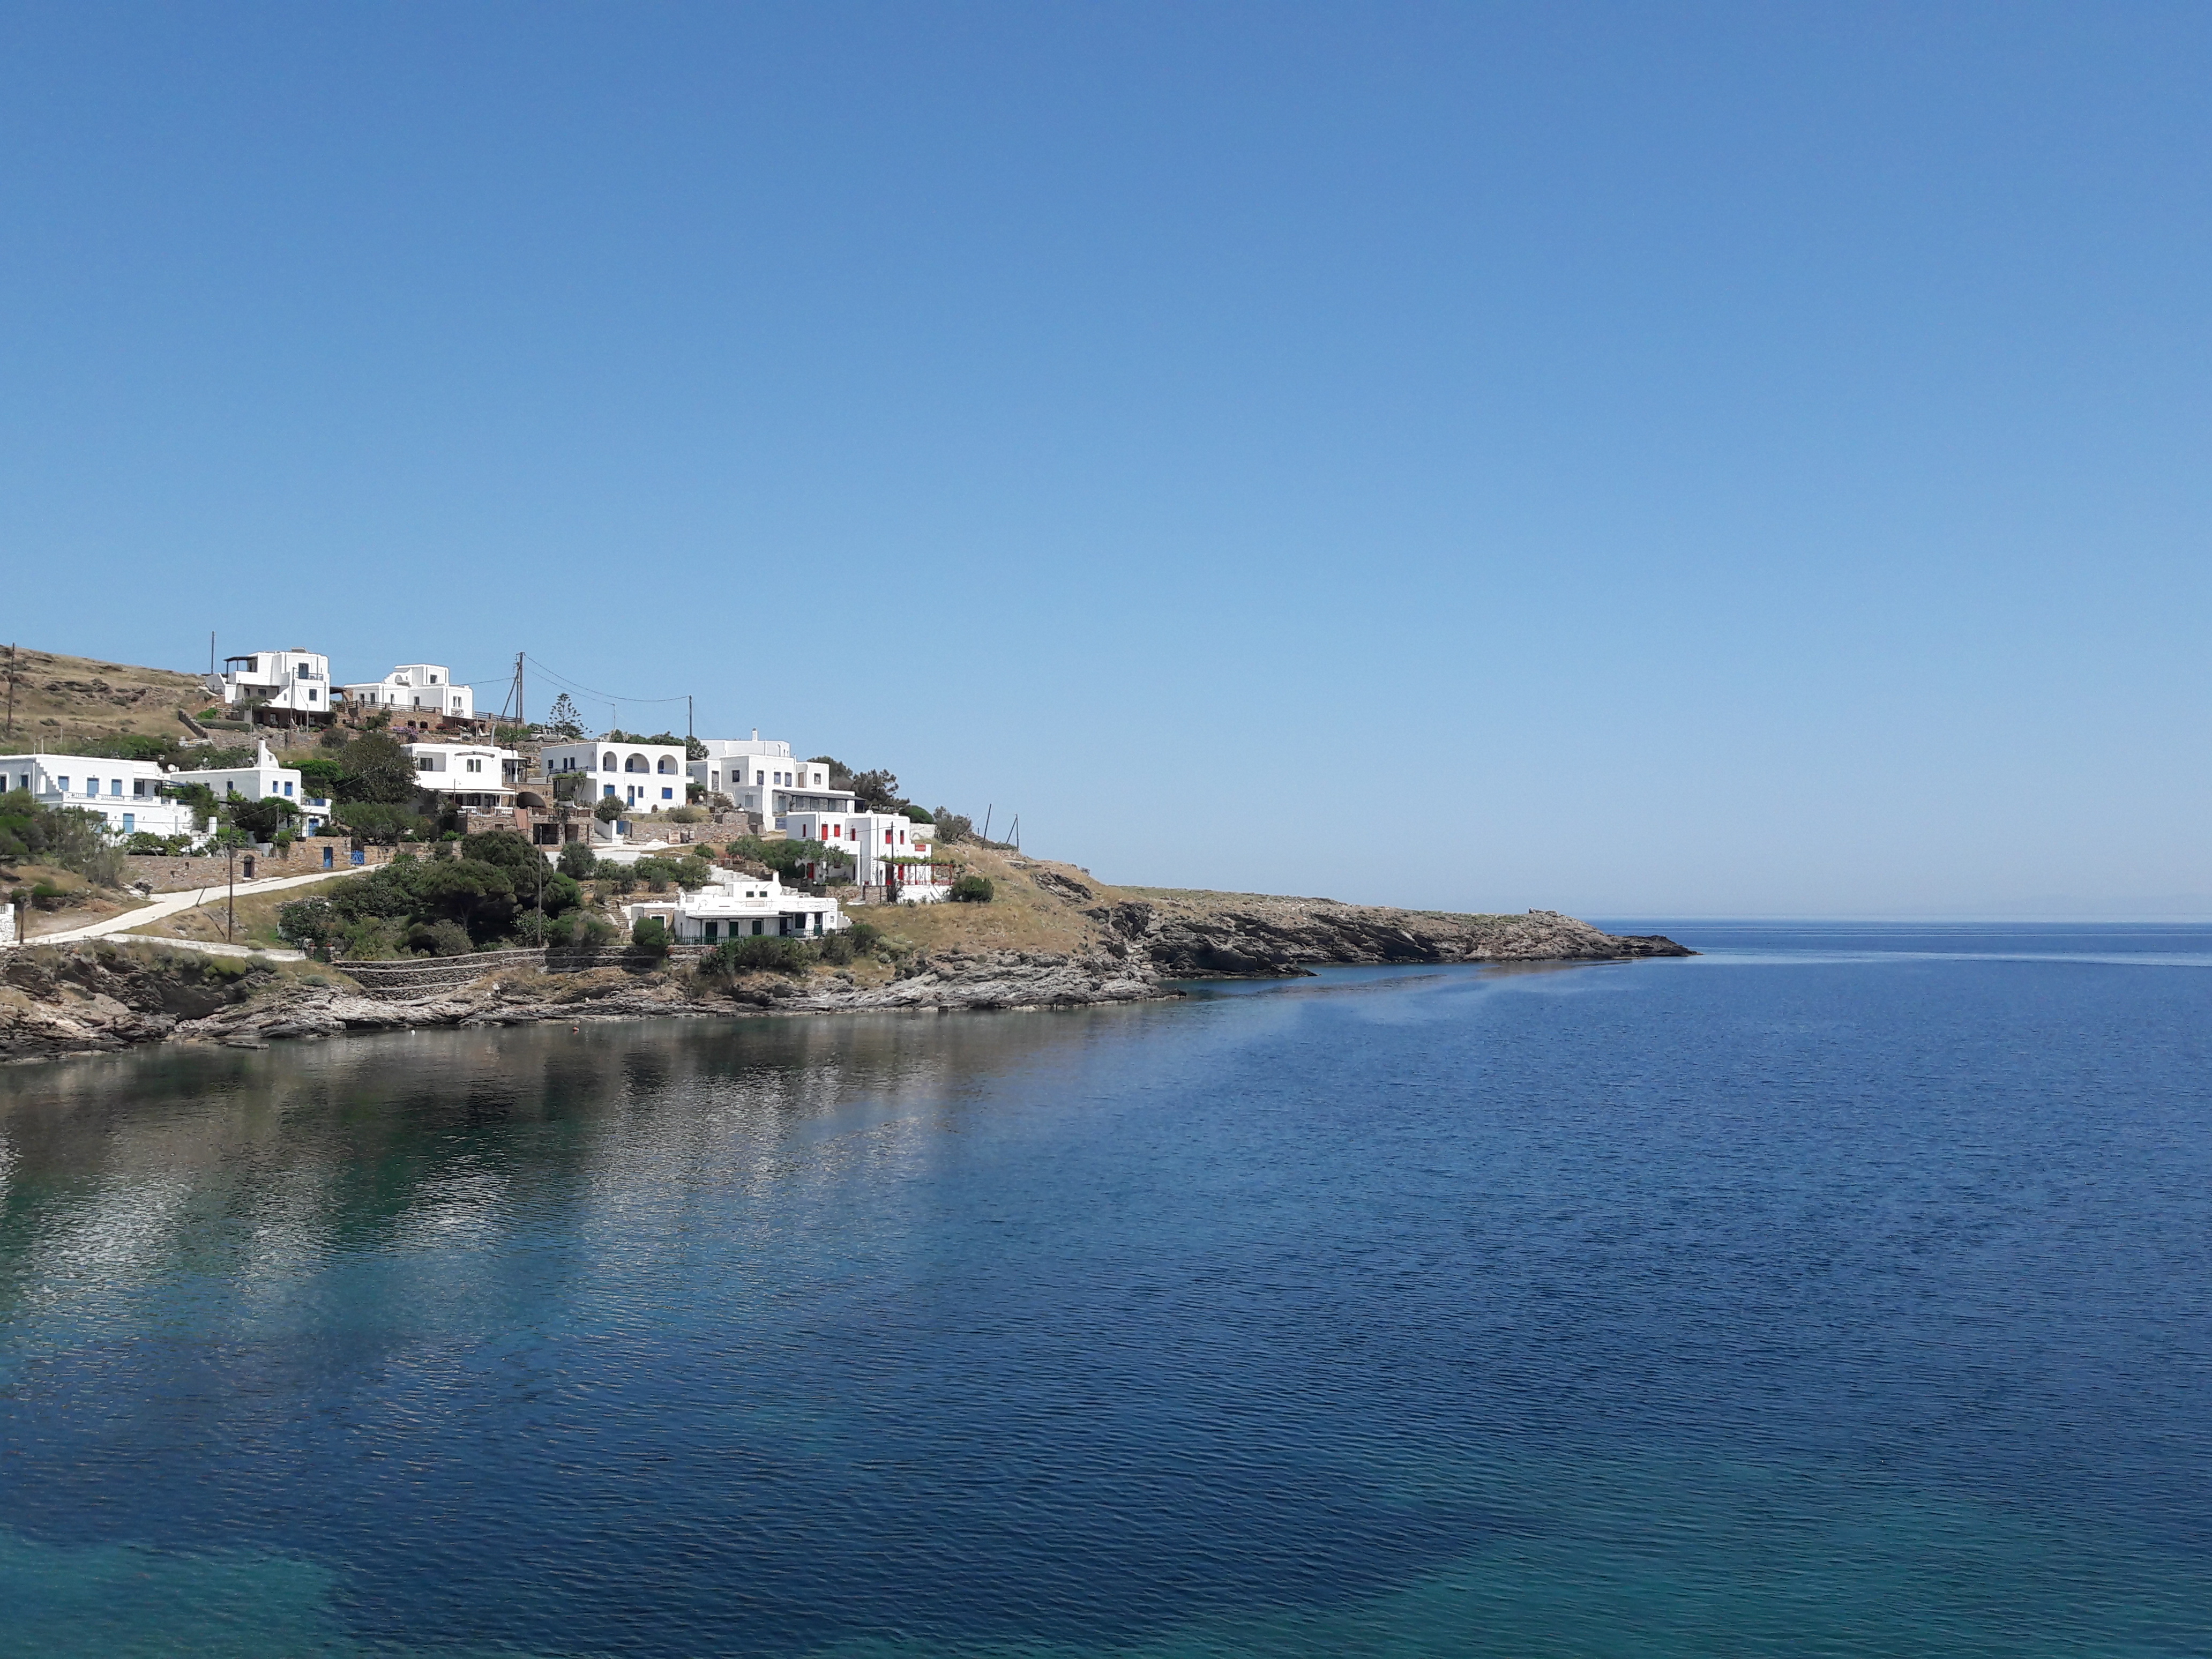 Image Energy storage systems provide the Greek island of Kythnos with a more stable grid